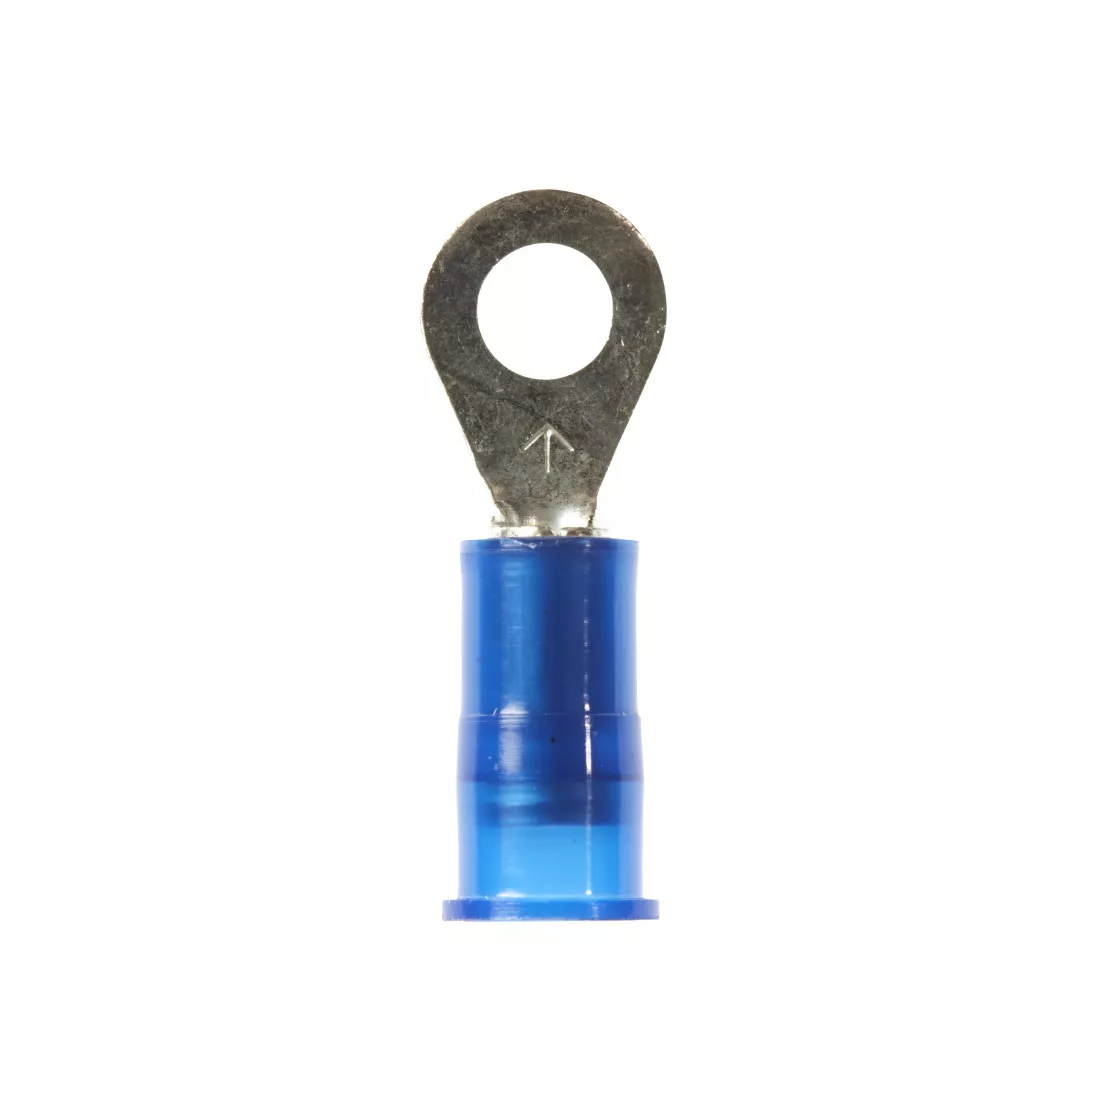 3M™ Scotchlok™ Ring Tongue, Nylon Insulated w/Insulation Grip MNG14-8RK,
Stud Size 8, 1000/Case